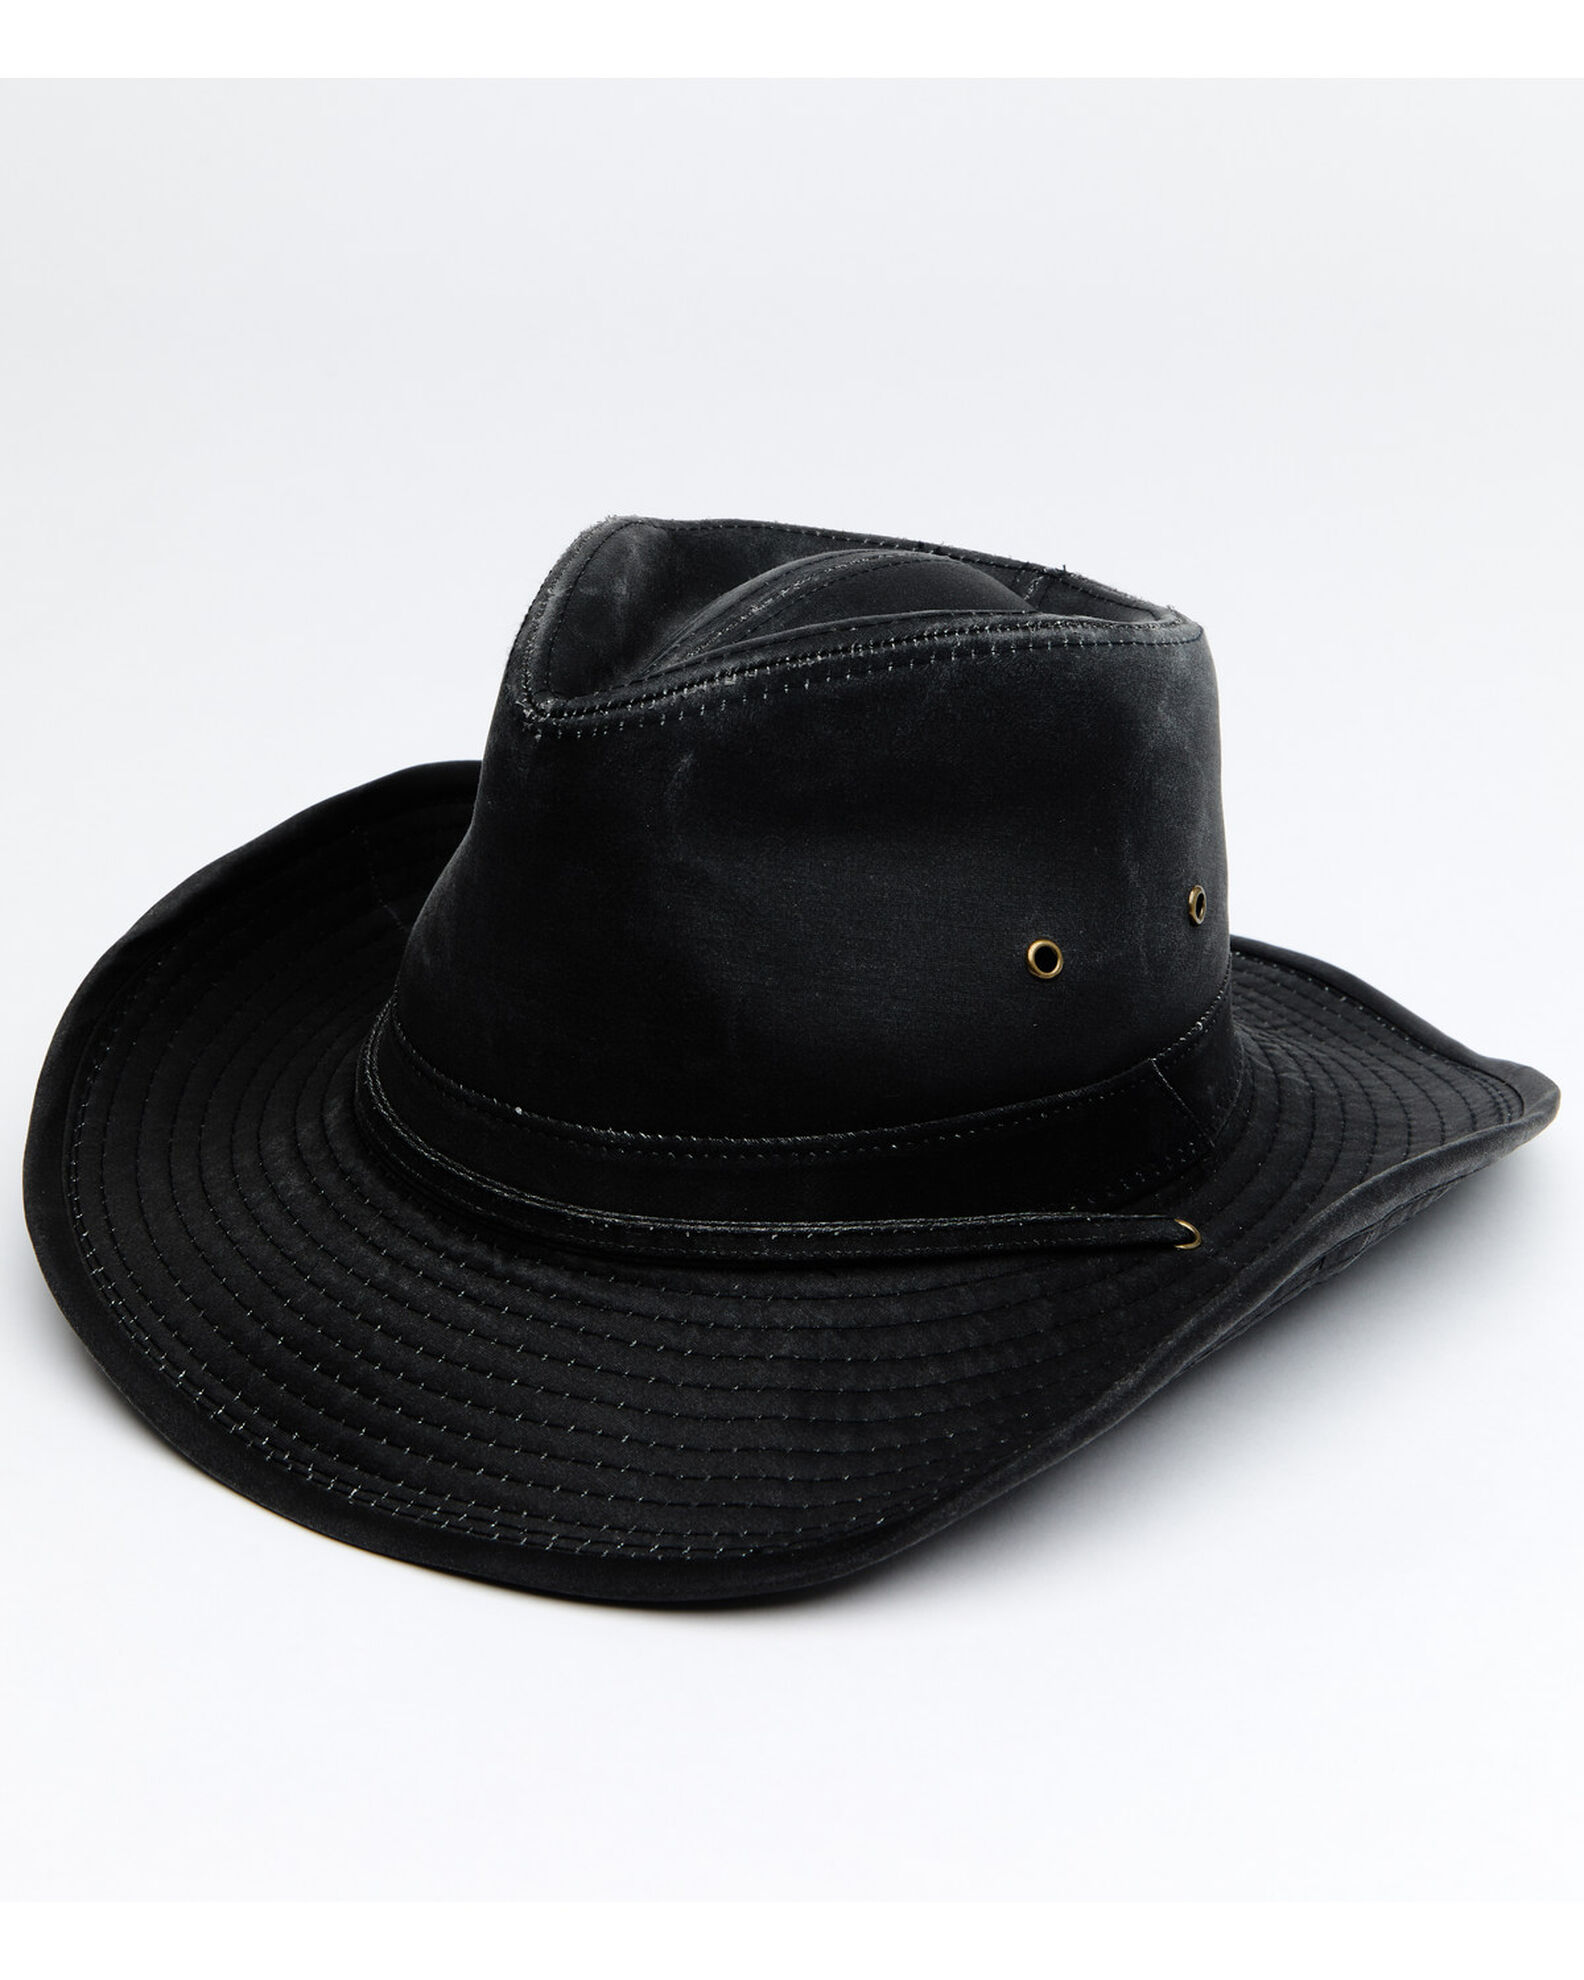 Product Name: Hawx Men's Outback Weathered Cotton Sun Work Hat